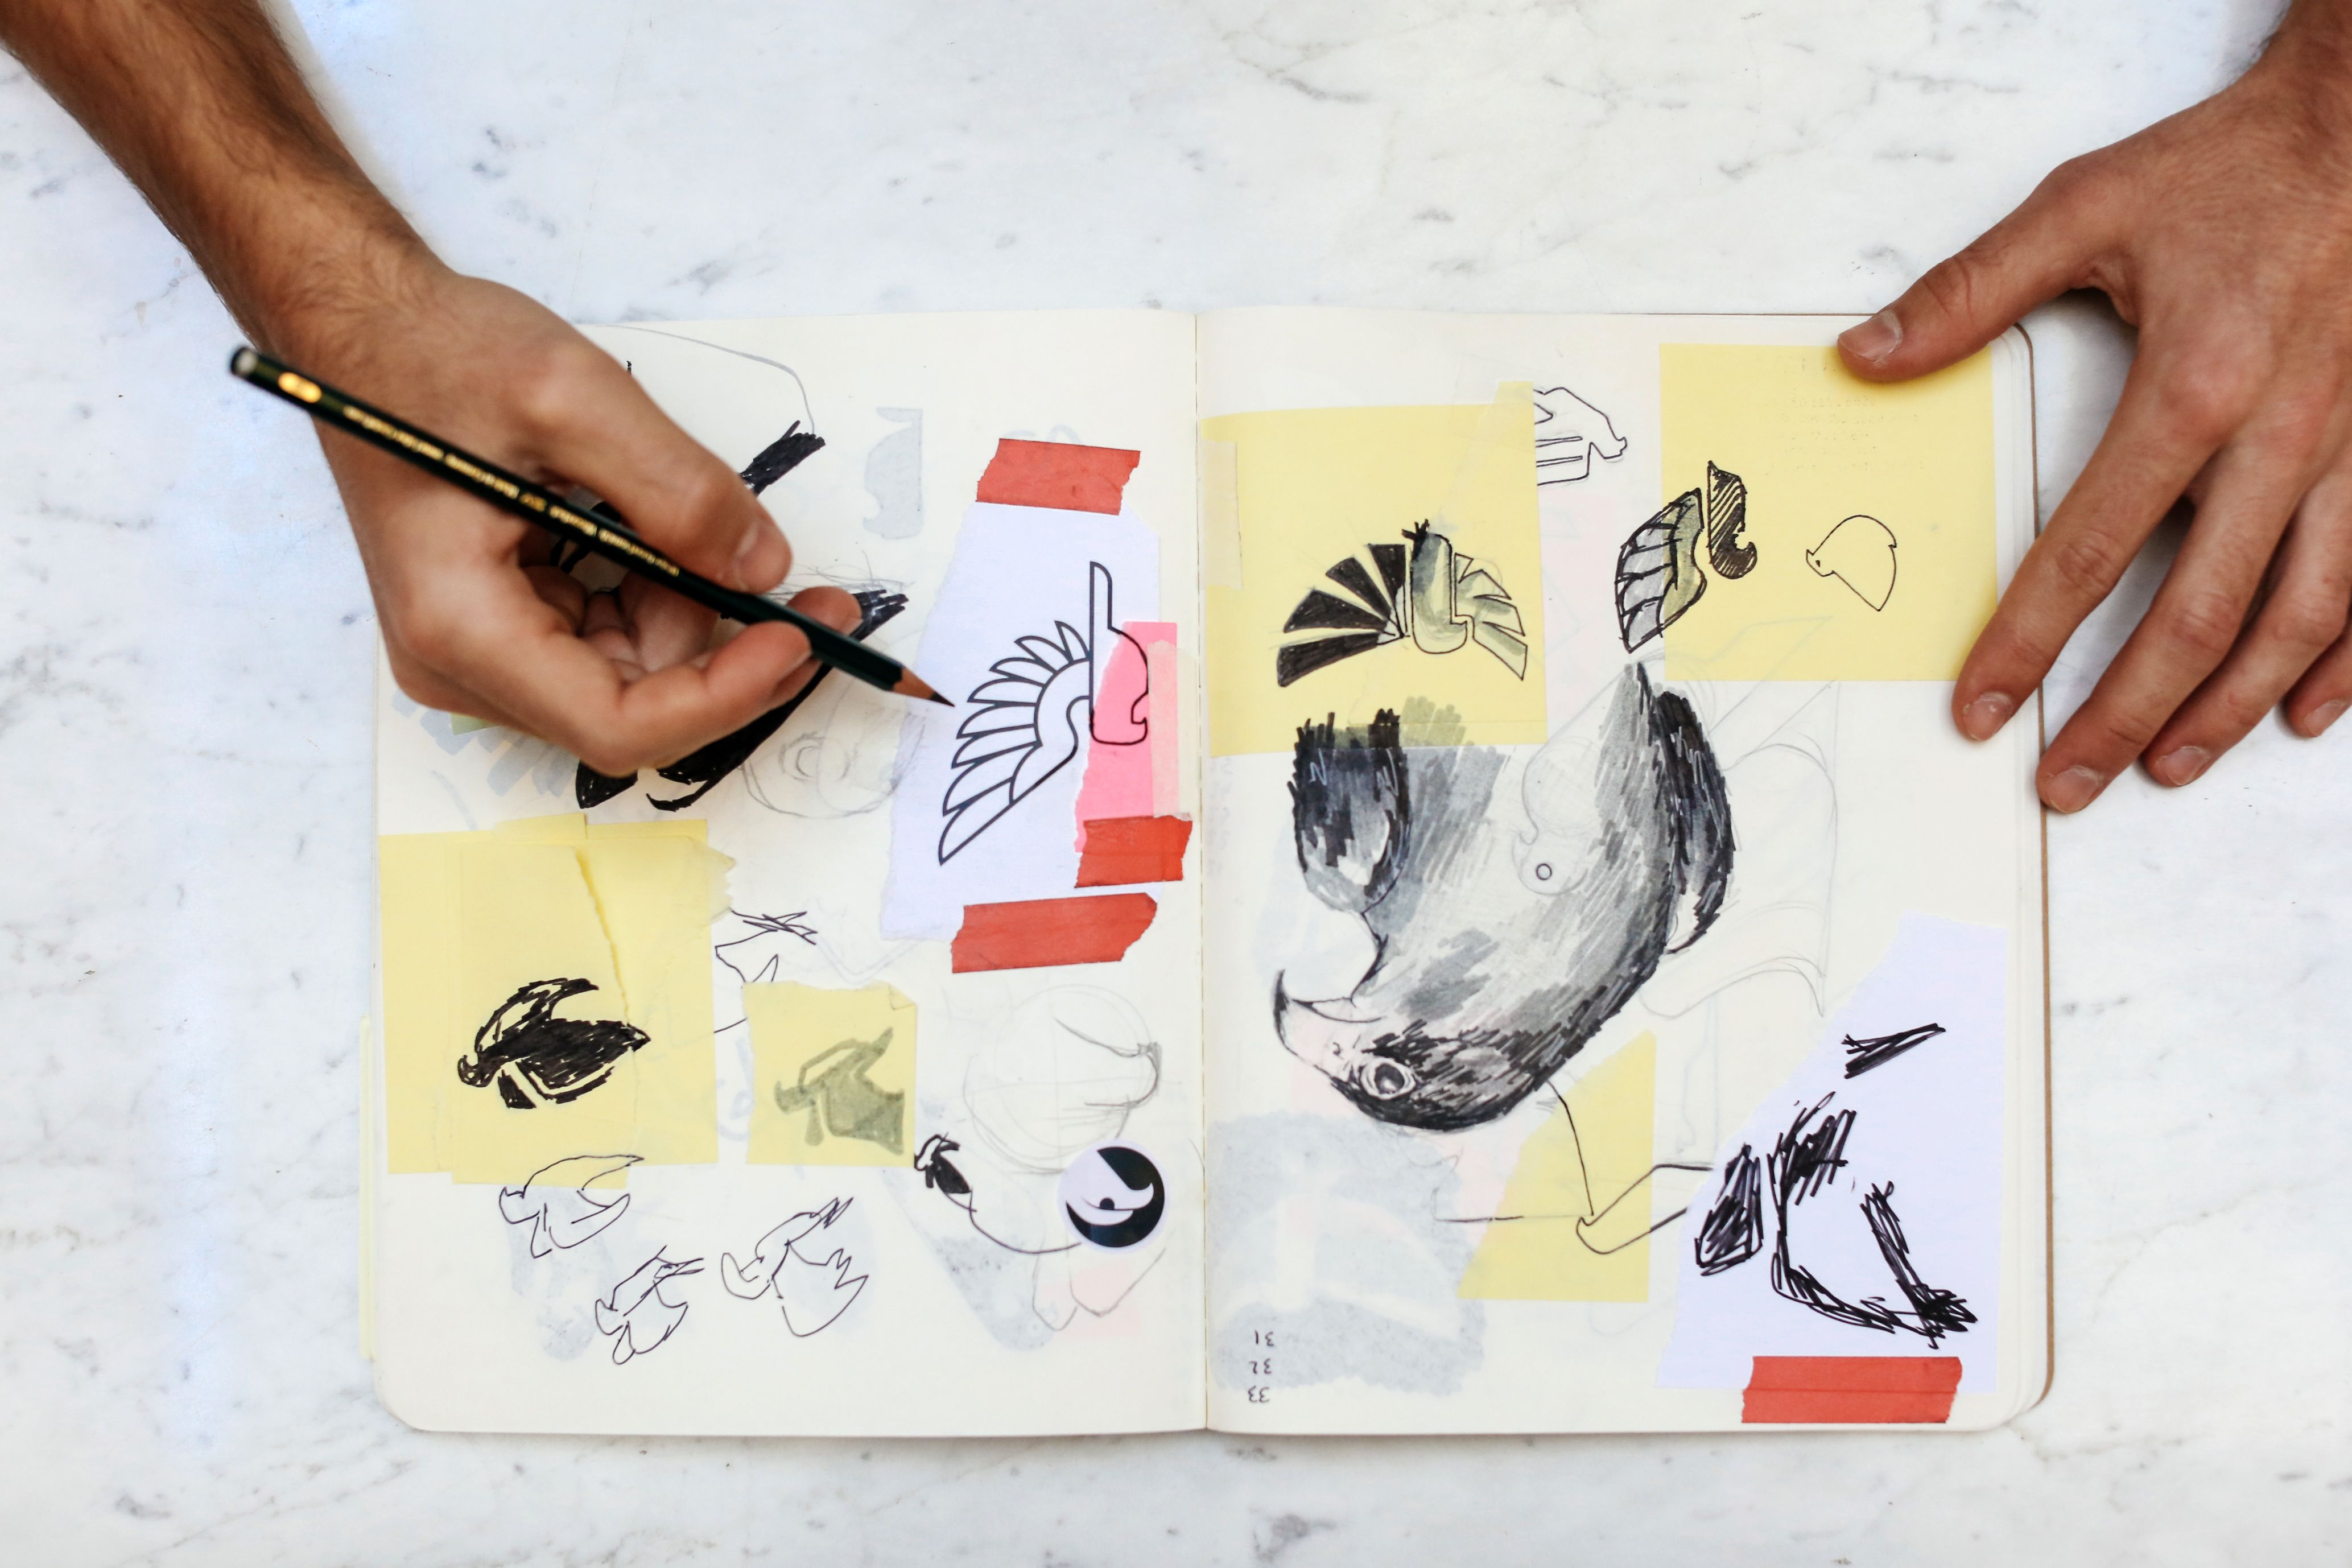 Hands working over a sketchbook full of drawings of birds, with layers of yellow shapes underneath. 